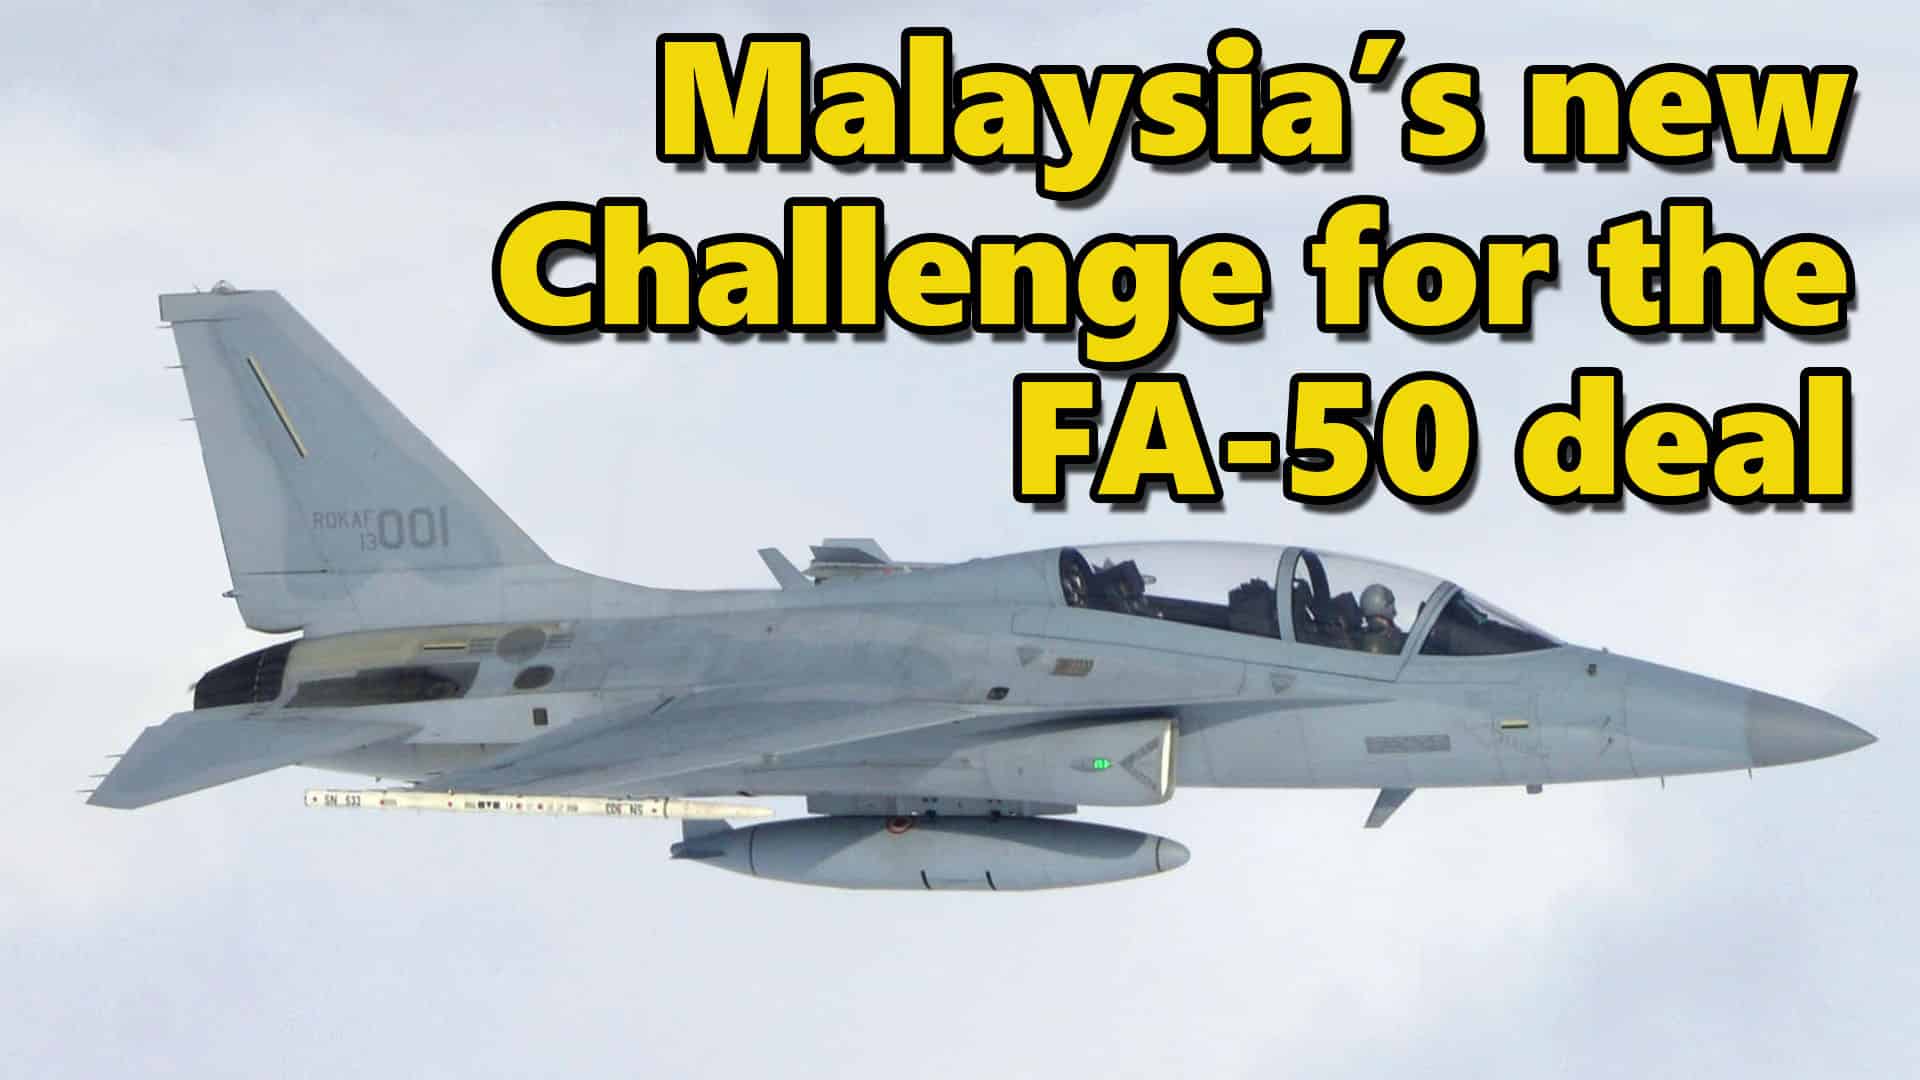 These are two new challenges Malaysia faces in purchasing FA50.